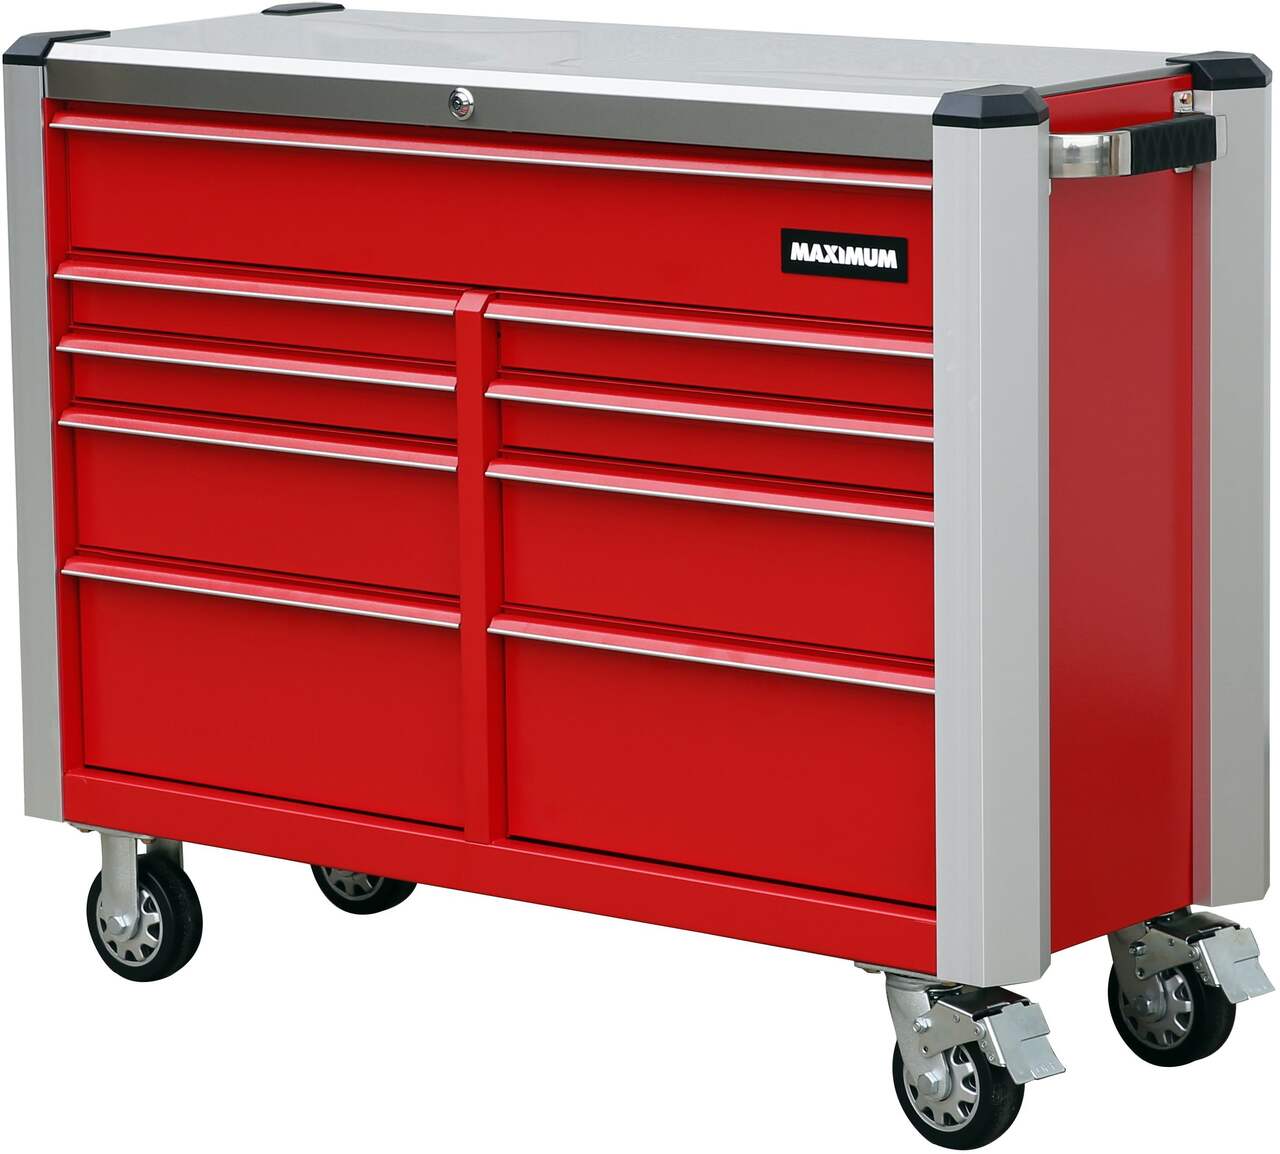 MAXIMUM Rolling Tools Storage Cabinet w/ 9 Drawers, Red, 47-in